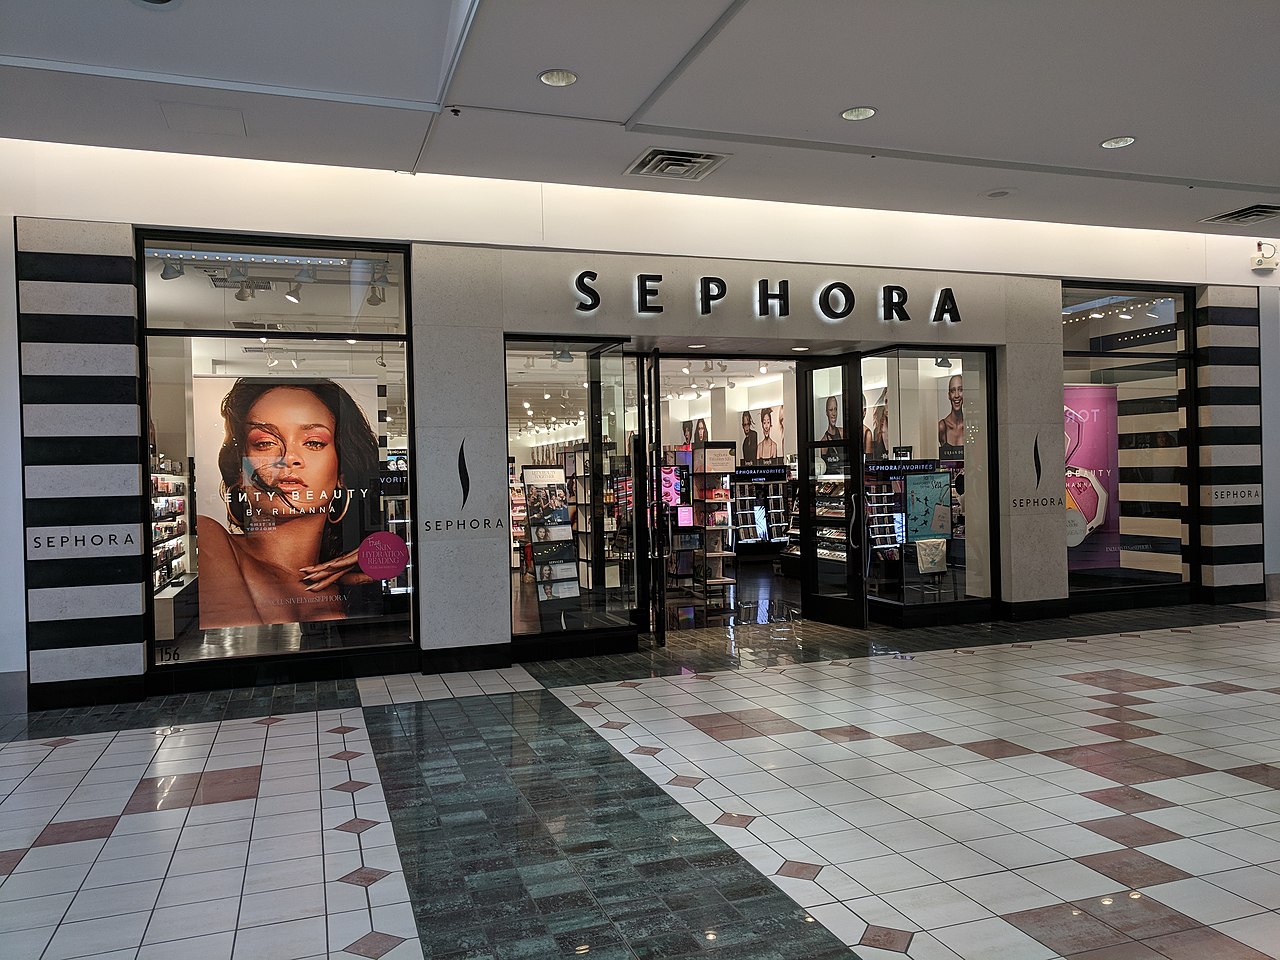 Sephora, as seen here in the Eastview Mall in Rochester, plans to extend its footprint. (Photo by Daniel Penfield/Wikimedia Commons)